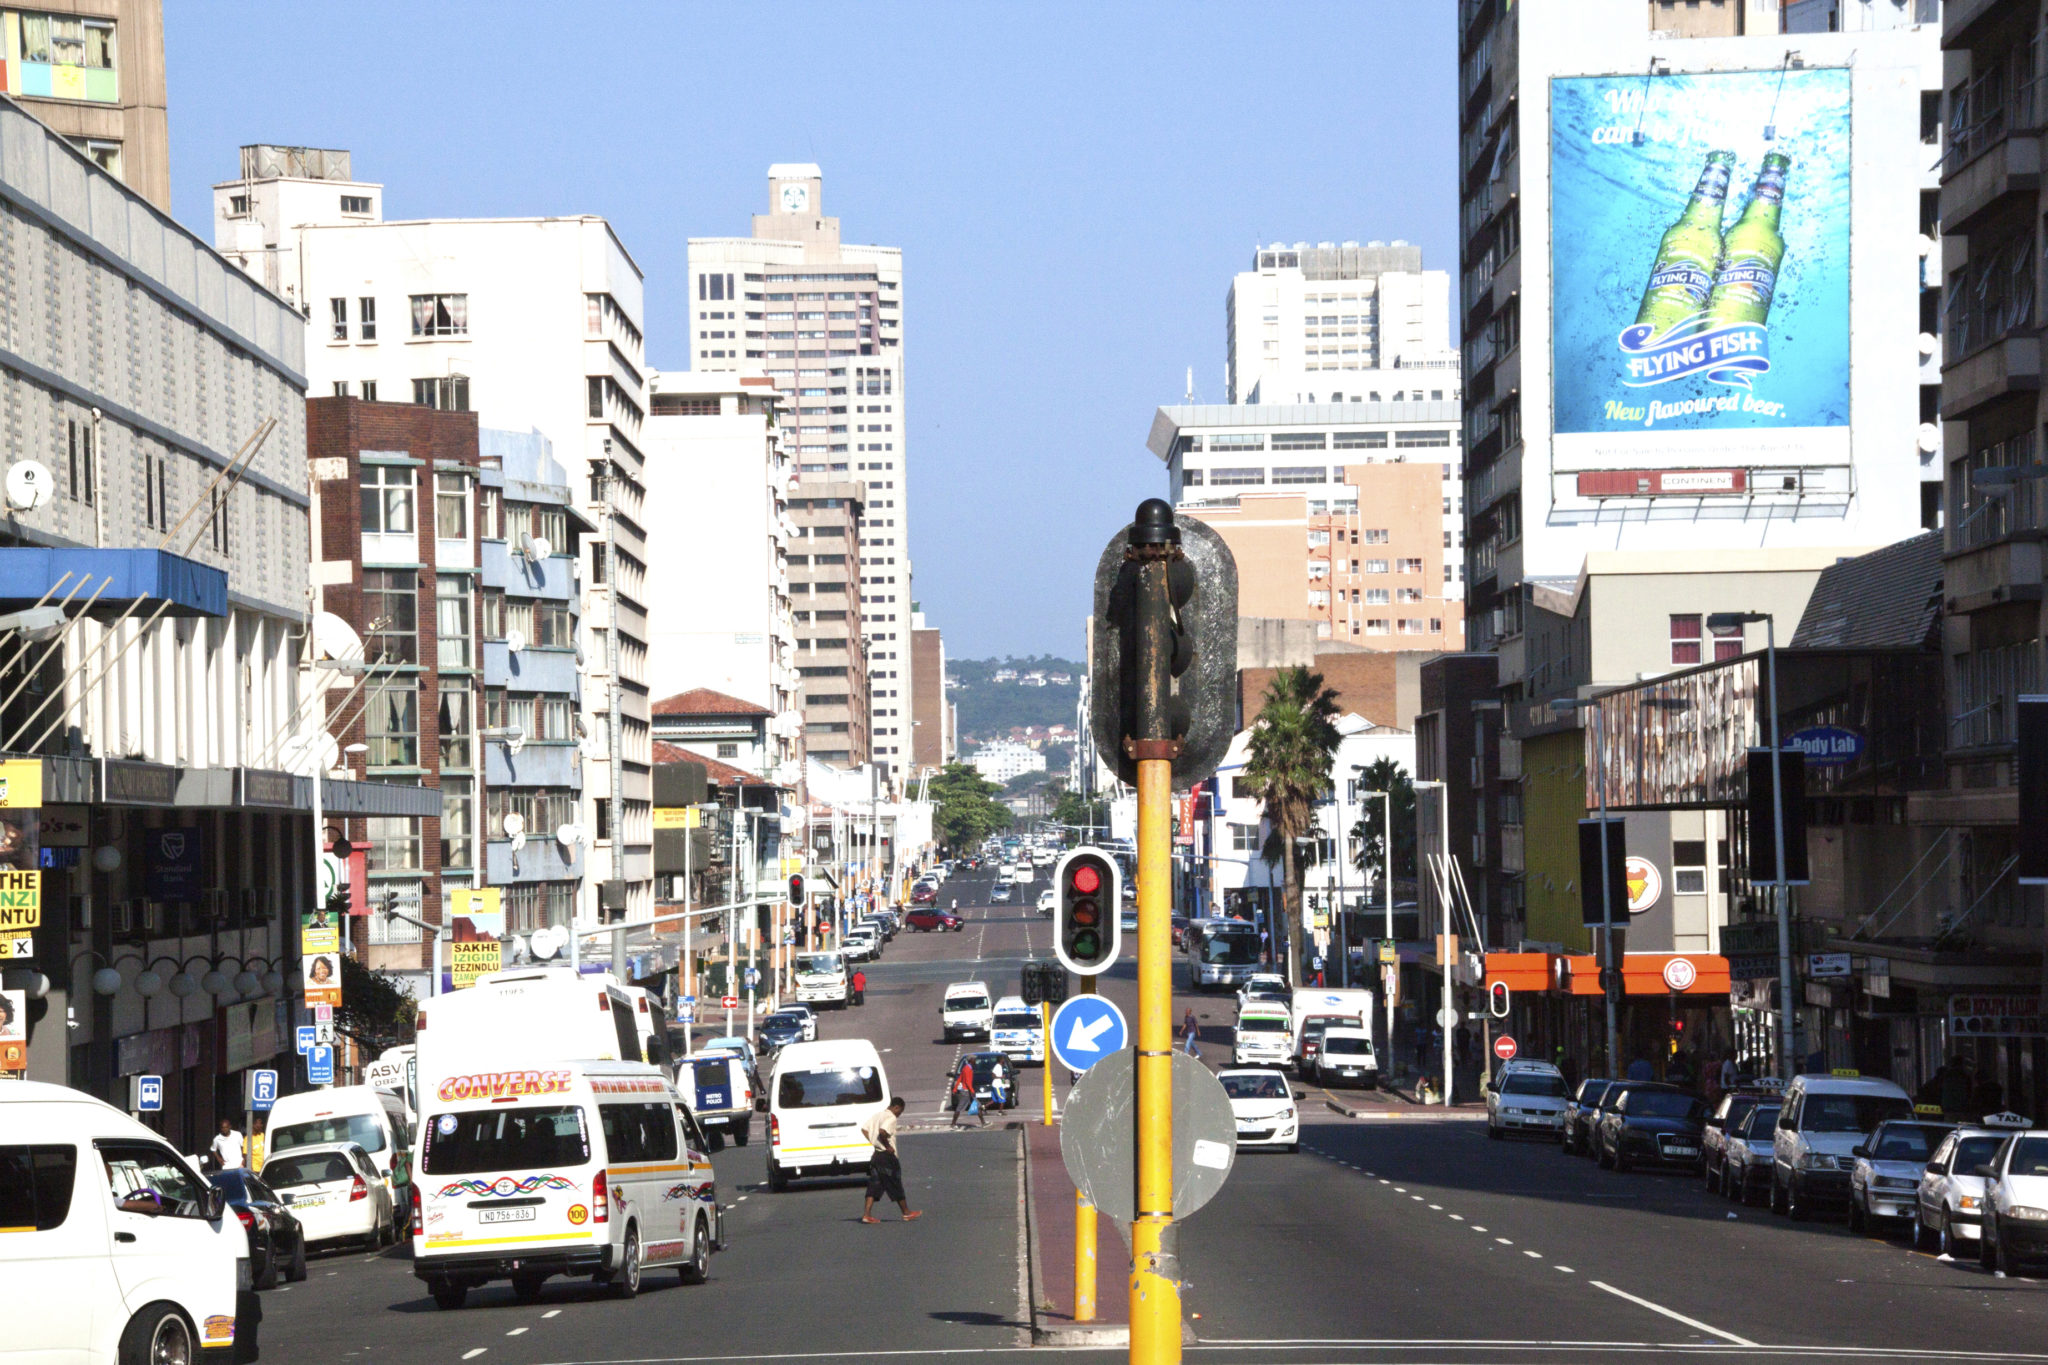 COMMERCIAL DISTRICT DURBAN SOUTH AFRICA 